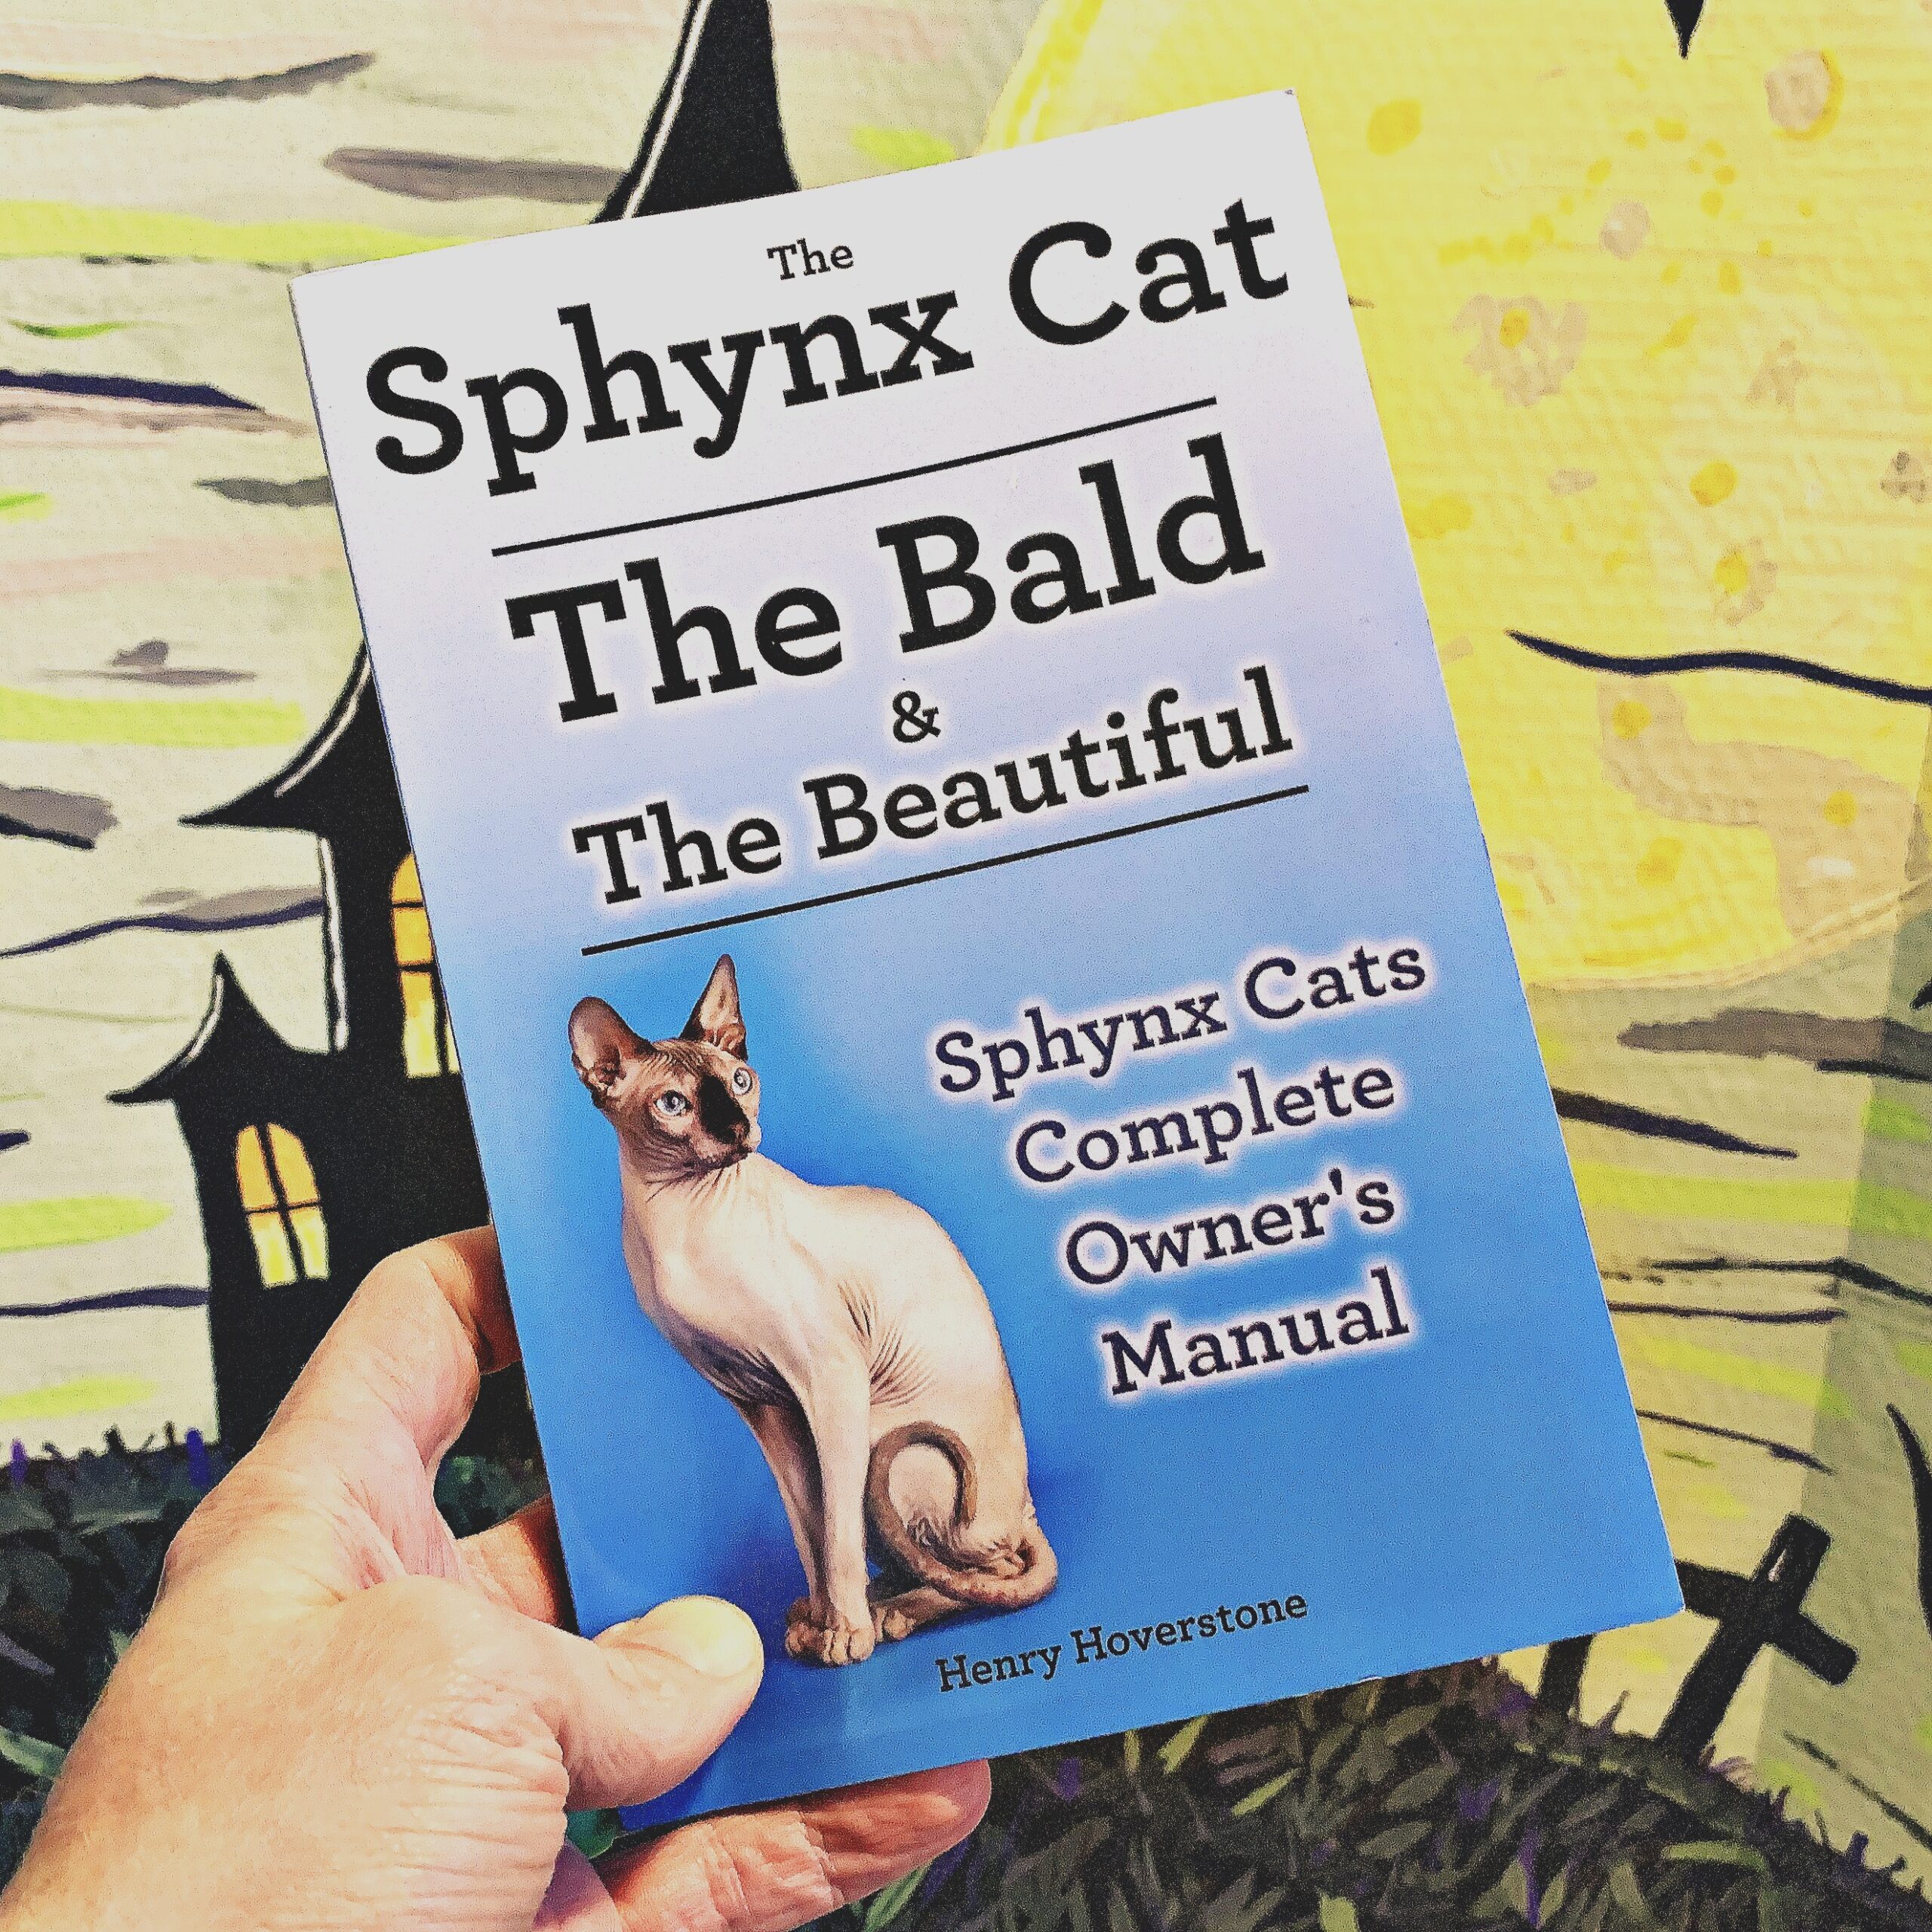 Product Review: The Sphynx Cat: The Bald & The Beautiful